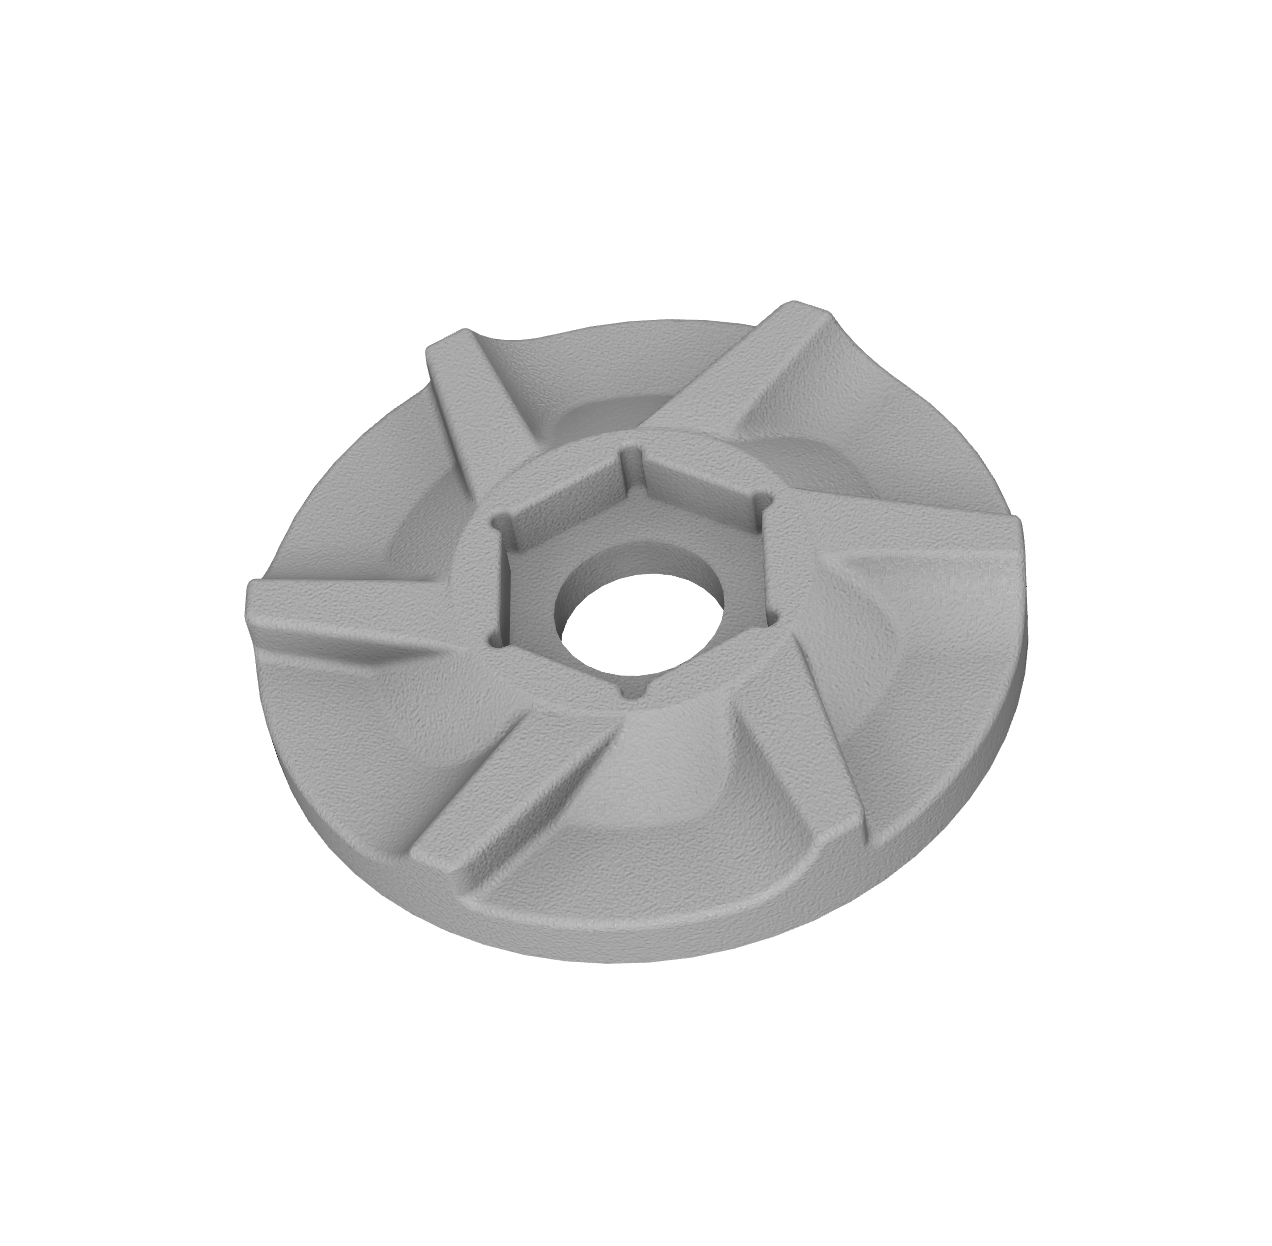 Odin Sidewinder Wheel Replacement - Beta - AIRTACUK